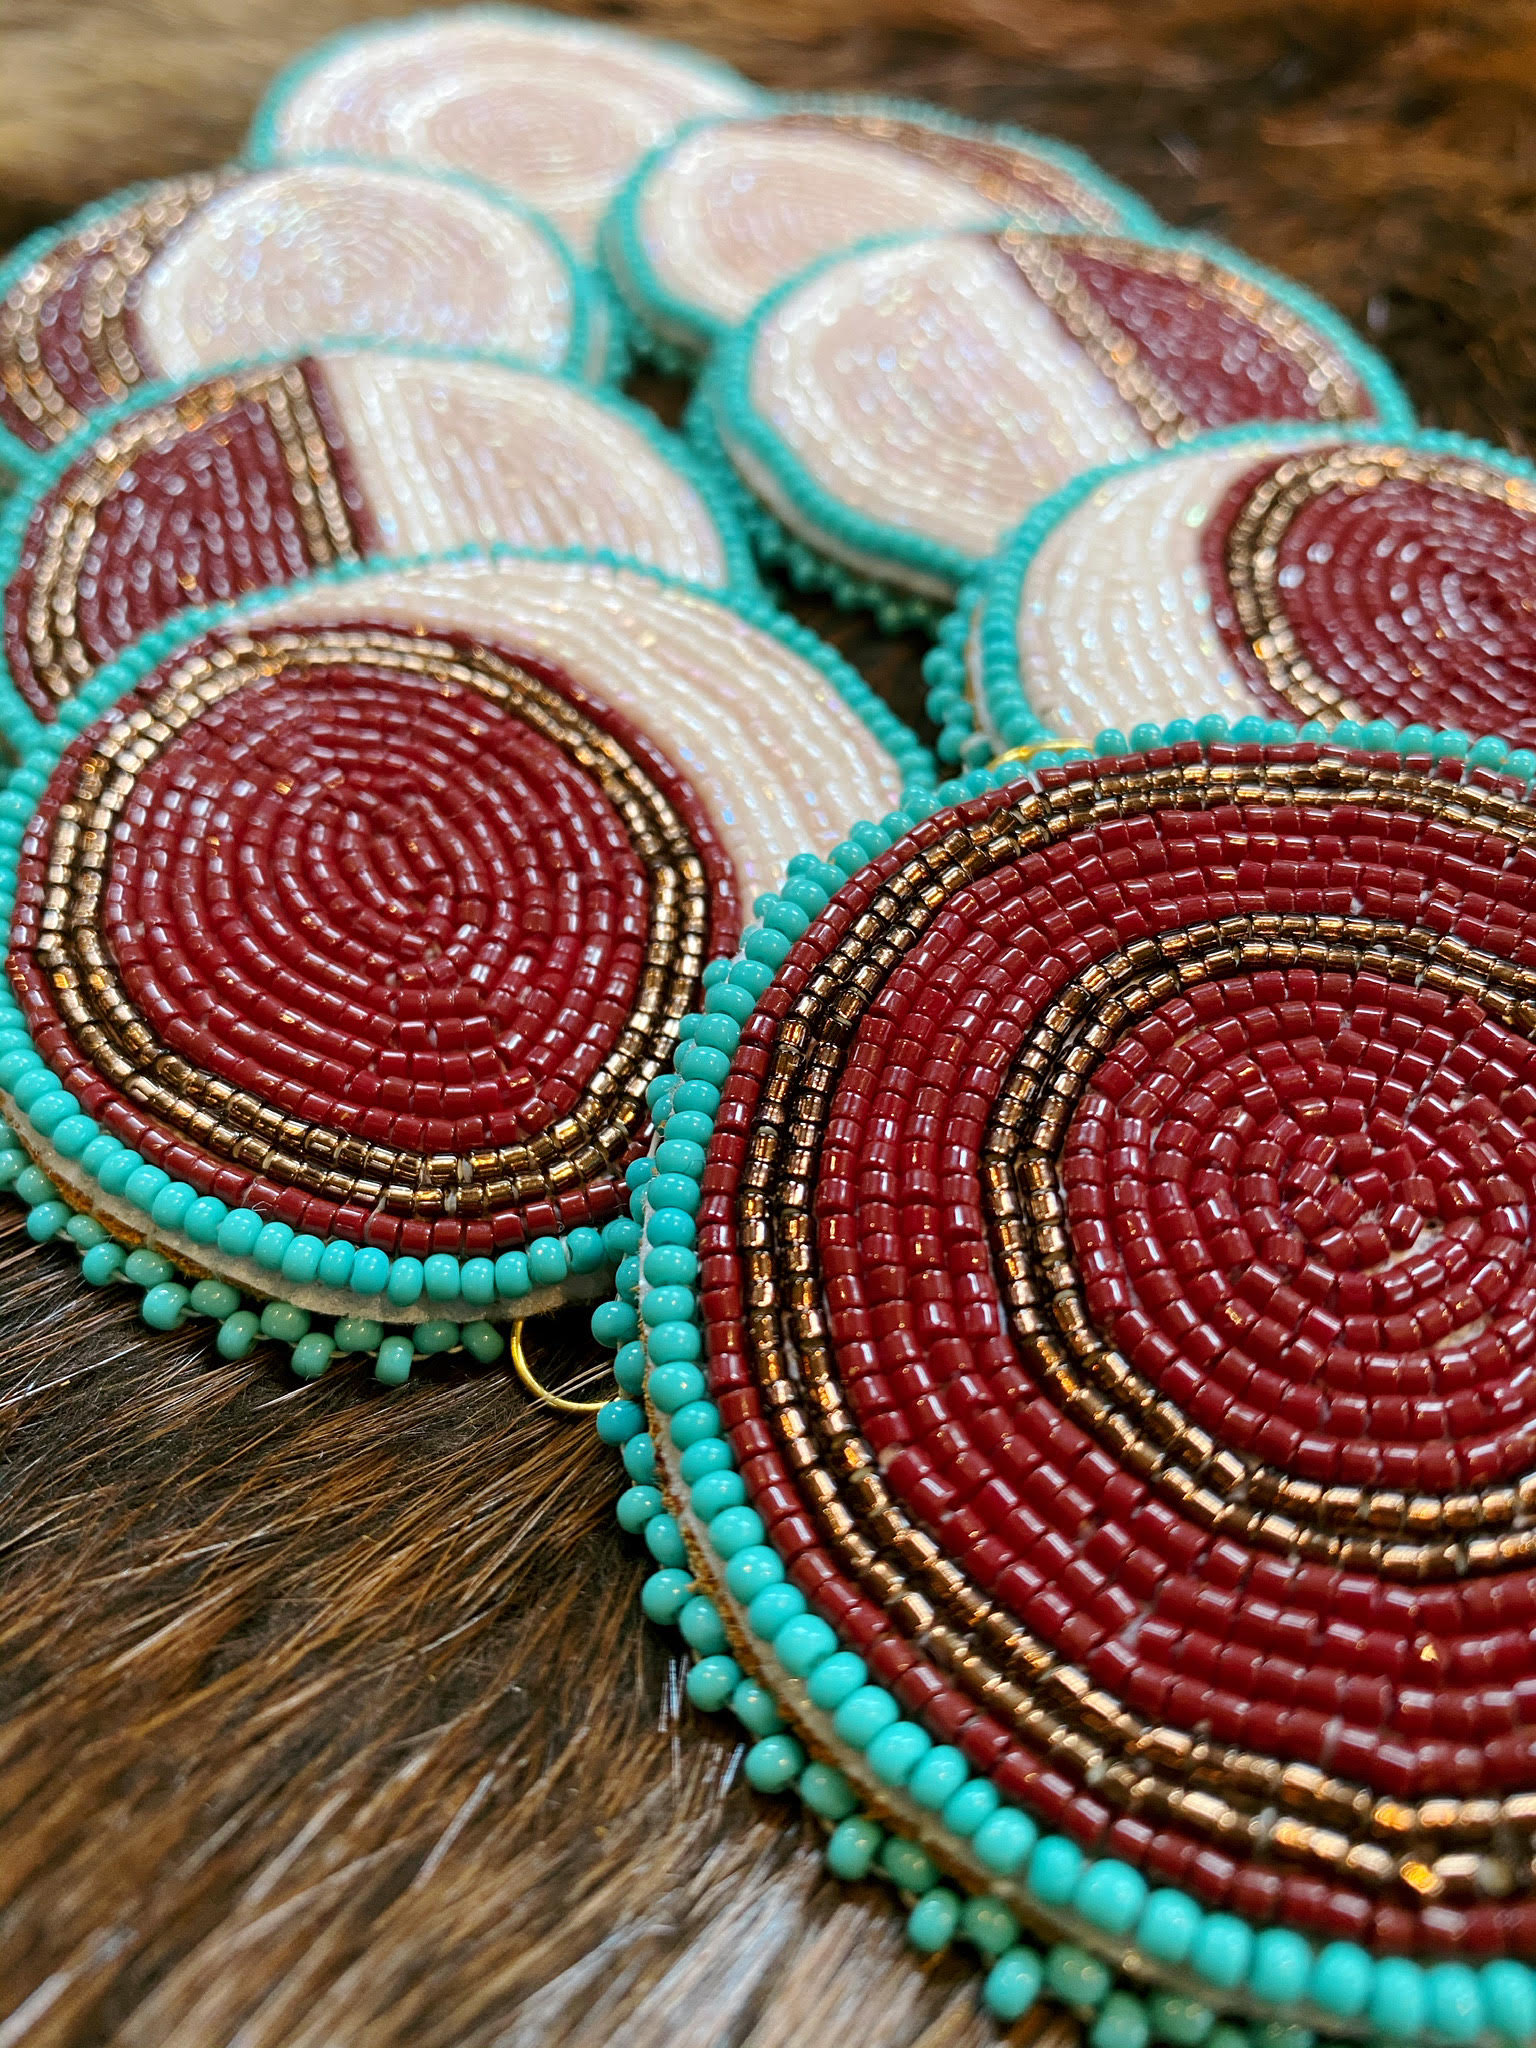 photo of beading work by artist lindsey lickers, red, teal and white beads in a circular design showing the moon phases